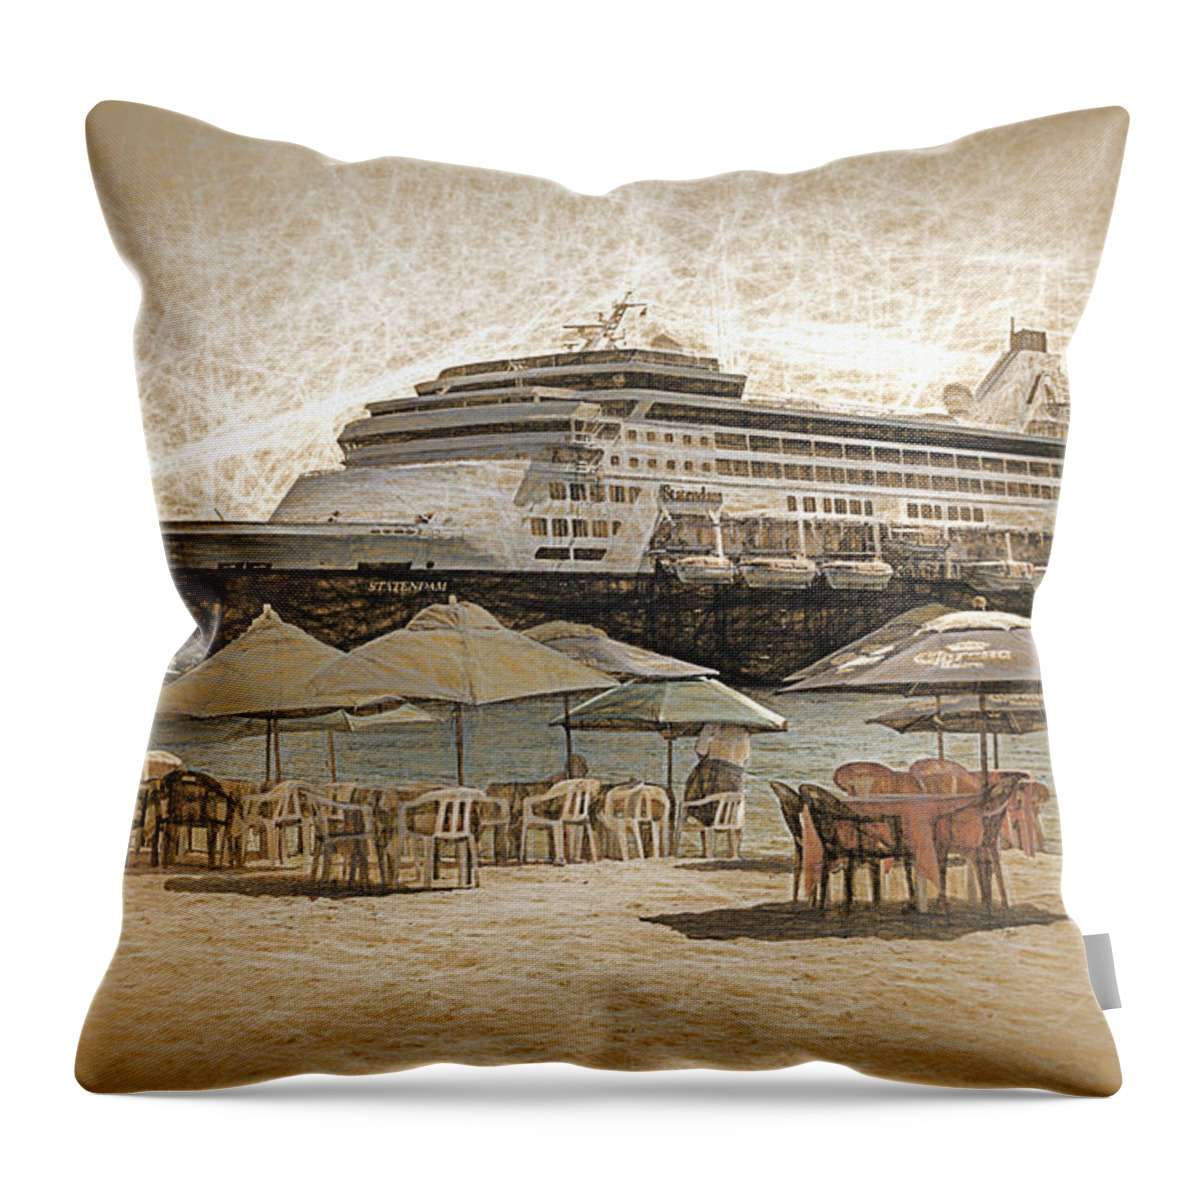 Tourism Throw Pillow featuring the photograph Statendam by Maria Coulson